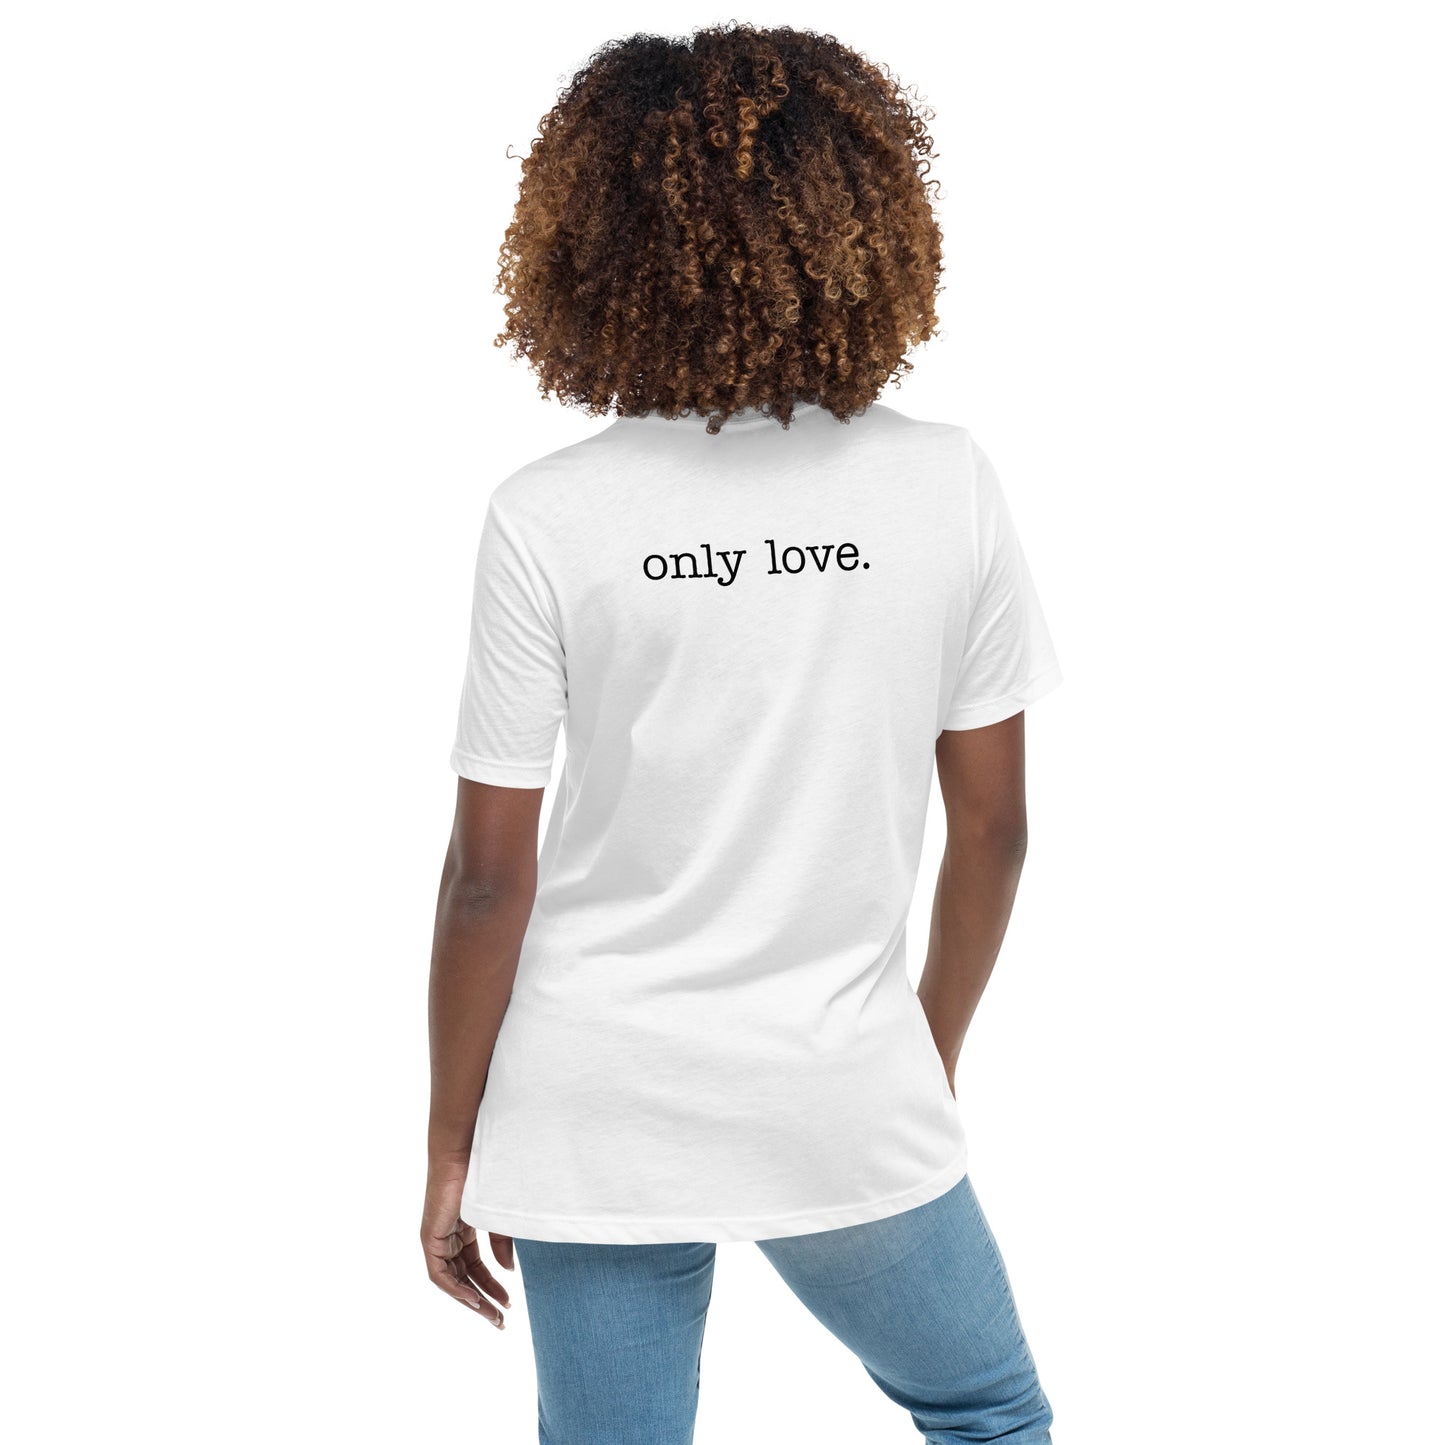 Only Love. Carnation - Women's Relaxed T-Shirt